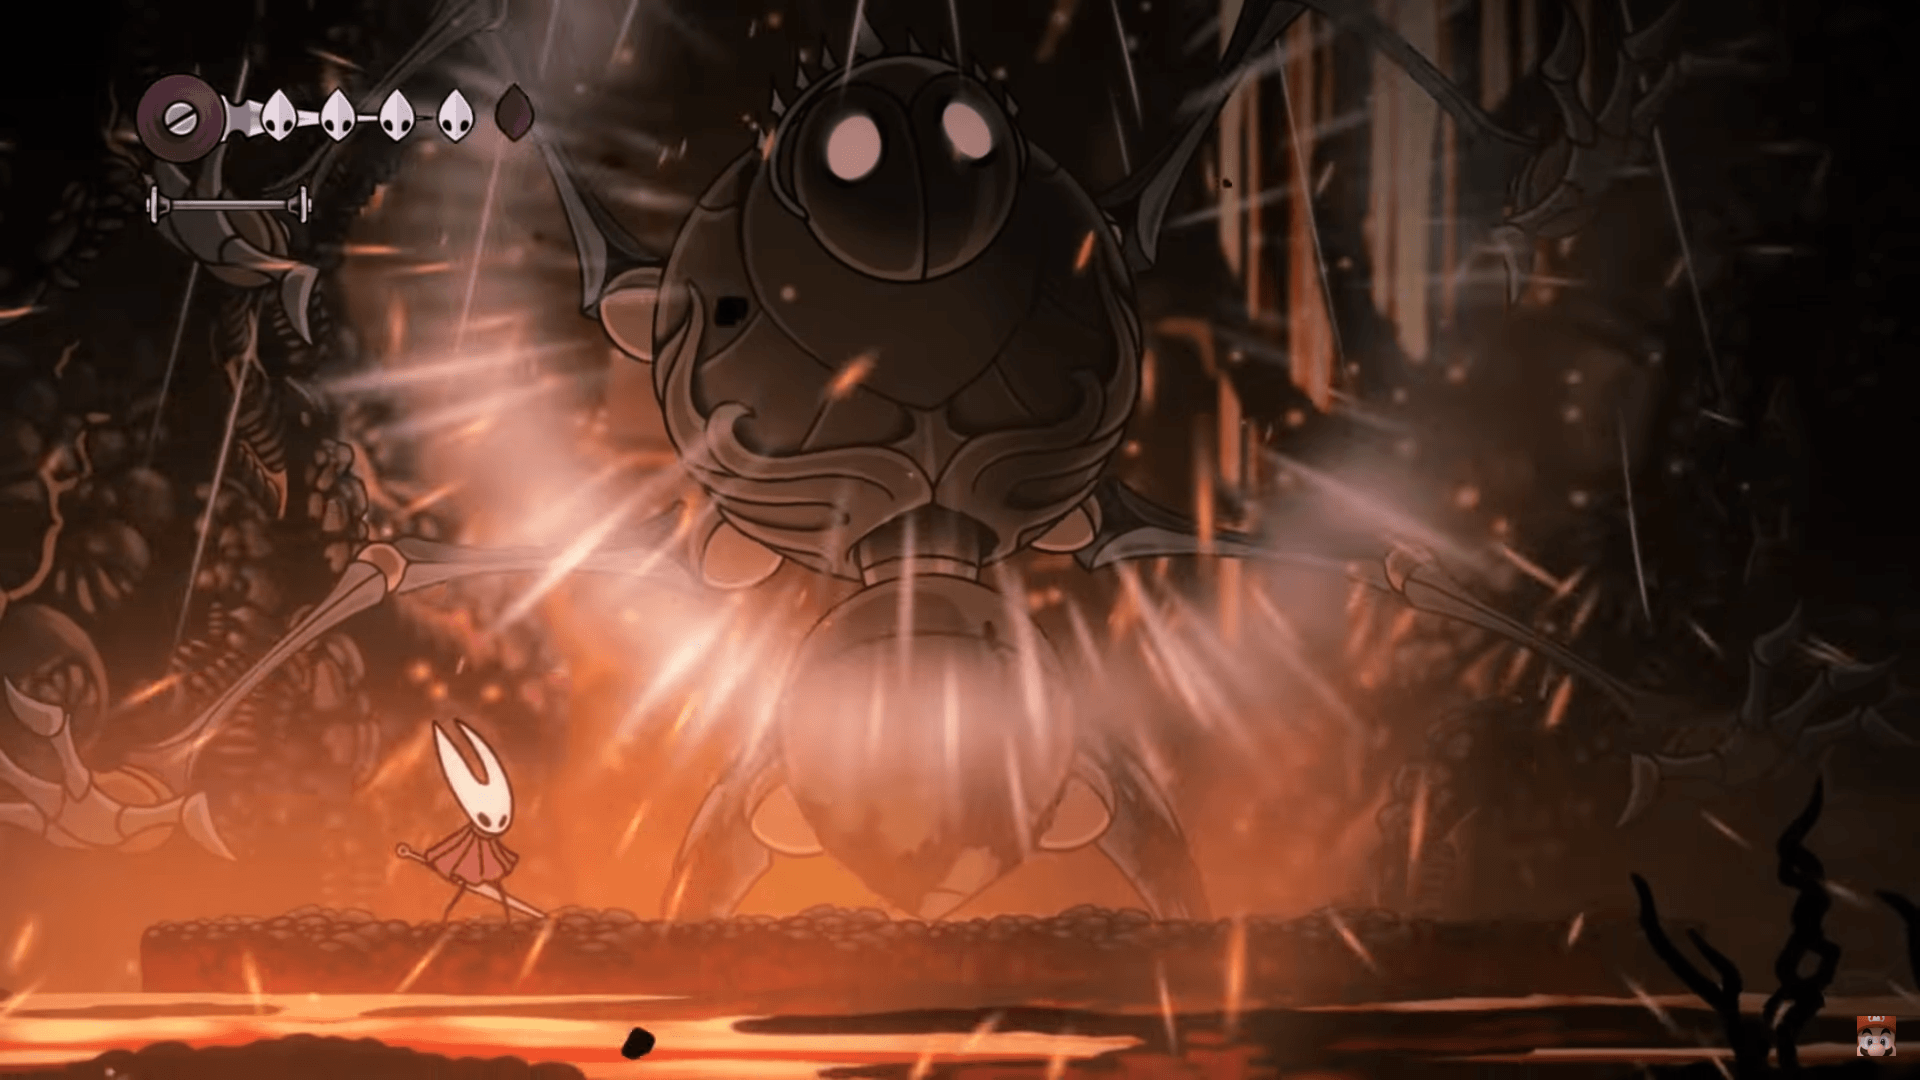 Slideshow: New Levels, Enemies, and Weapons in Hollow Knight